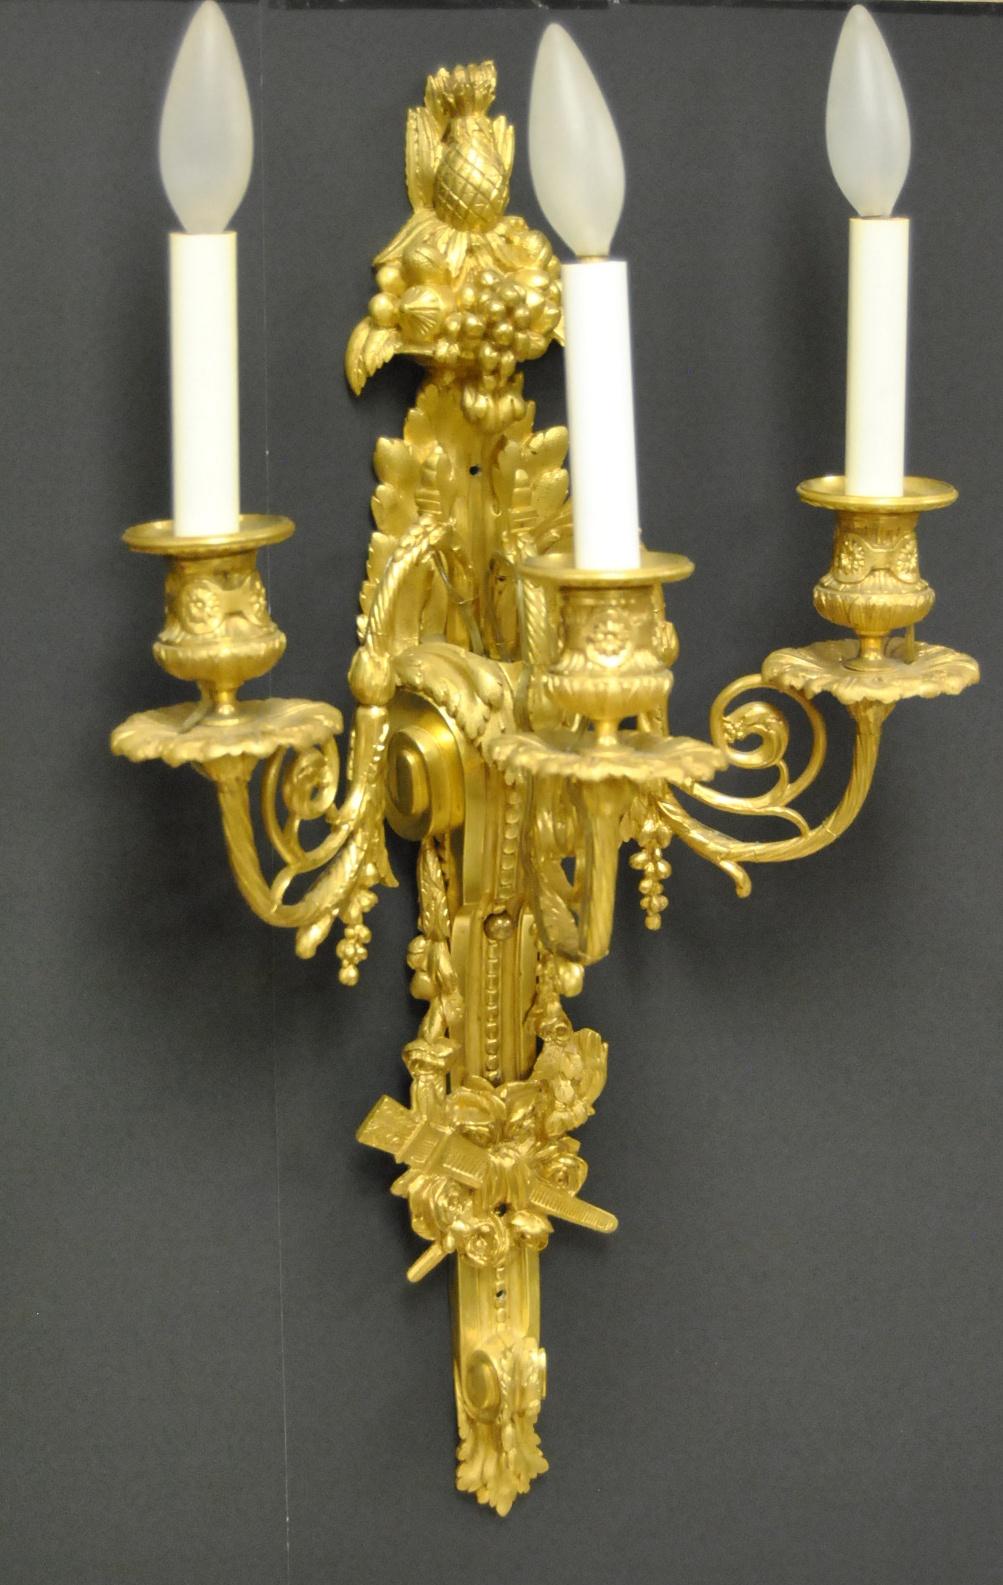 Stunning pair French style gold doré bronze three socket sconces. Twisted arms with grape clusters details. Fruit designs at the top featuring pineapple, grapes and apples. Three-dimensional rose reliefs at the bottom. Two pair are available. Price